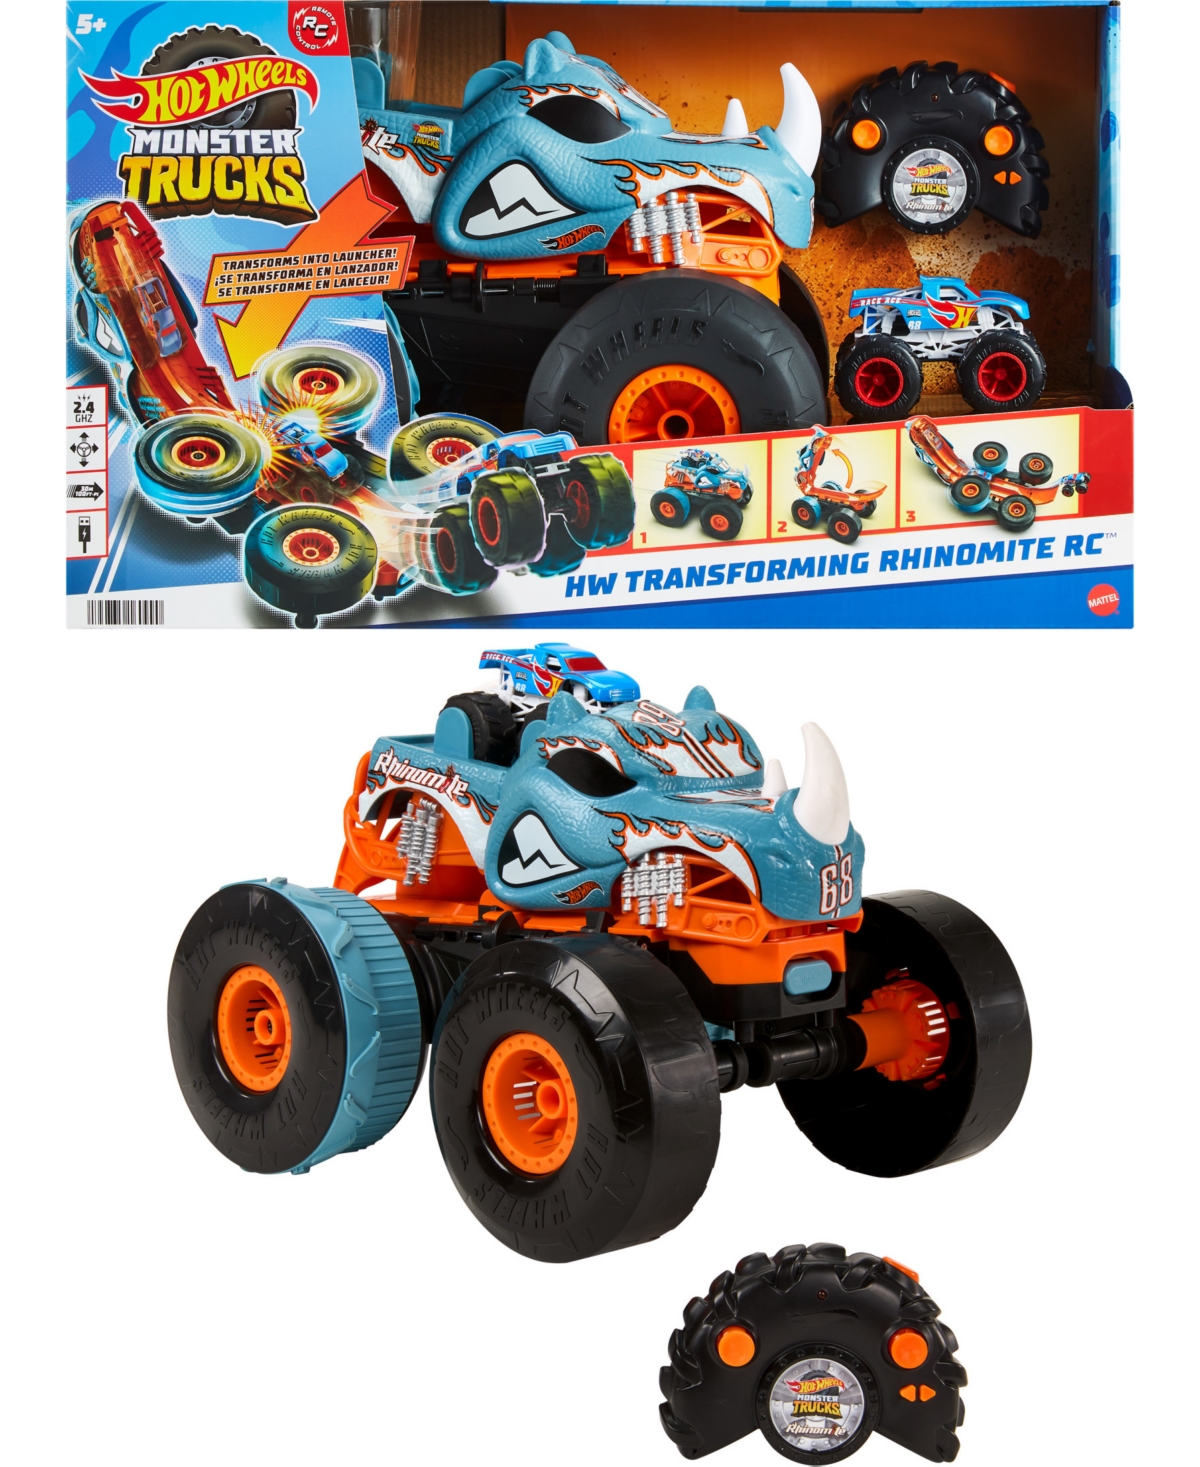 Shop Hot Wheels Monster Trucks Hw Changing Rhinomite Rc In 1:12 Scale With 1:64 Scale Toy Truck In Multicolor